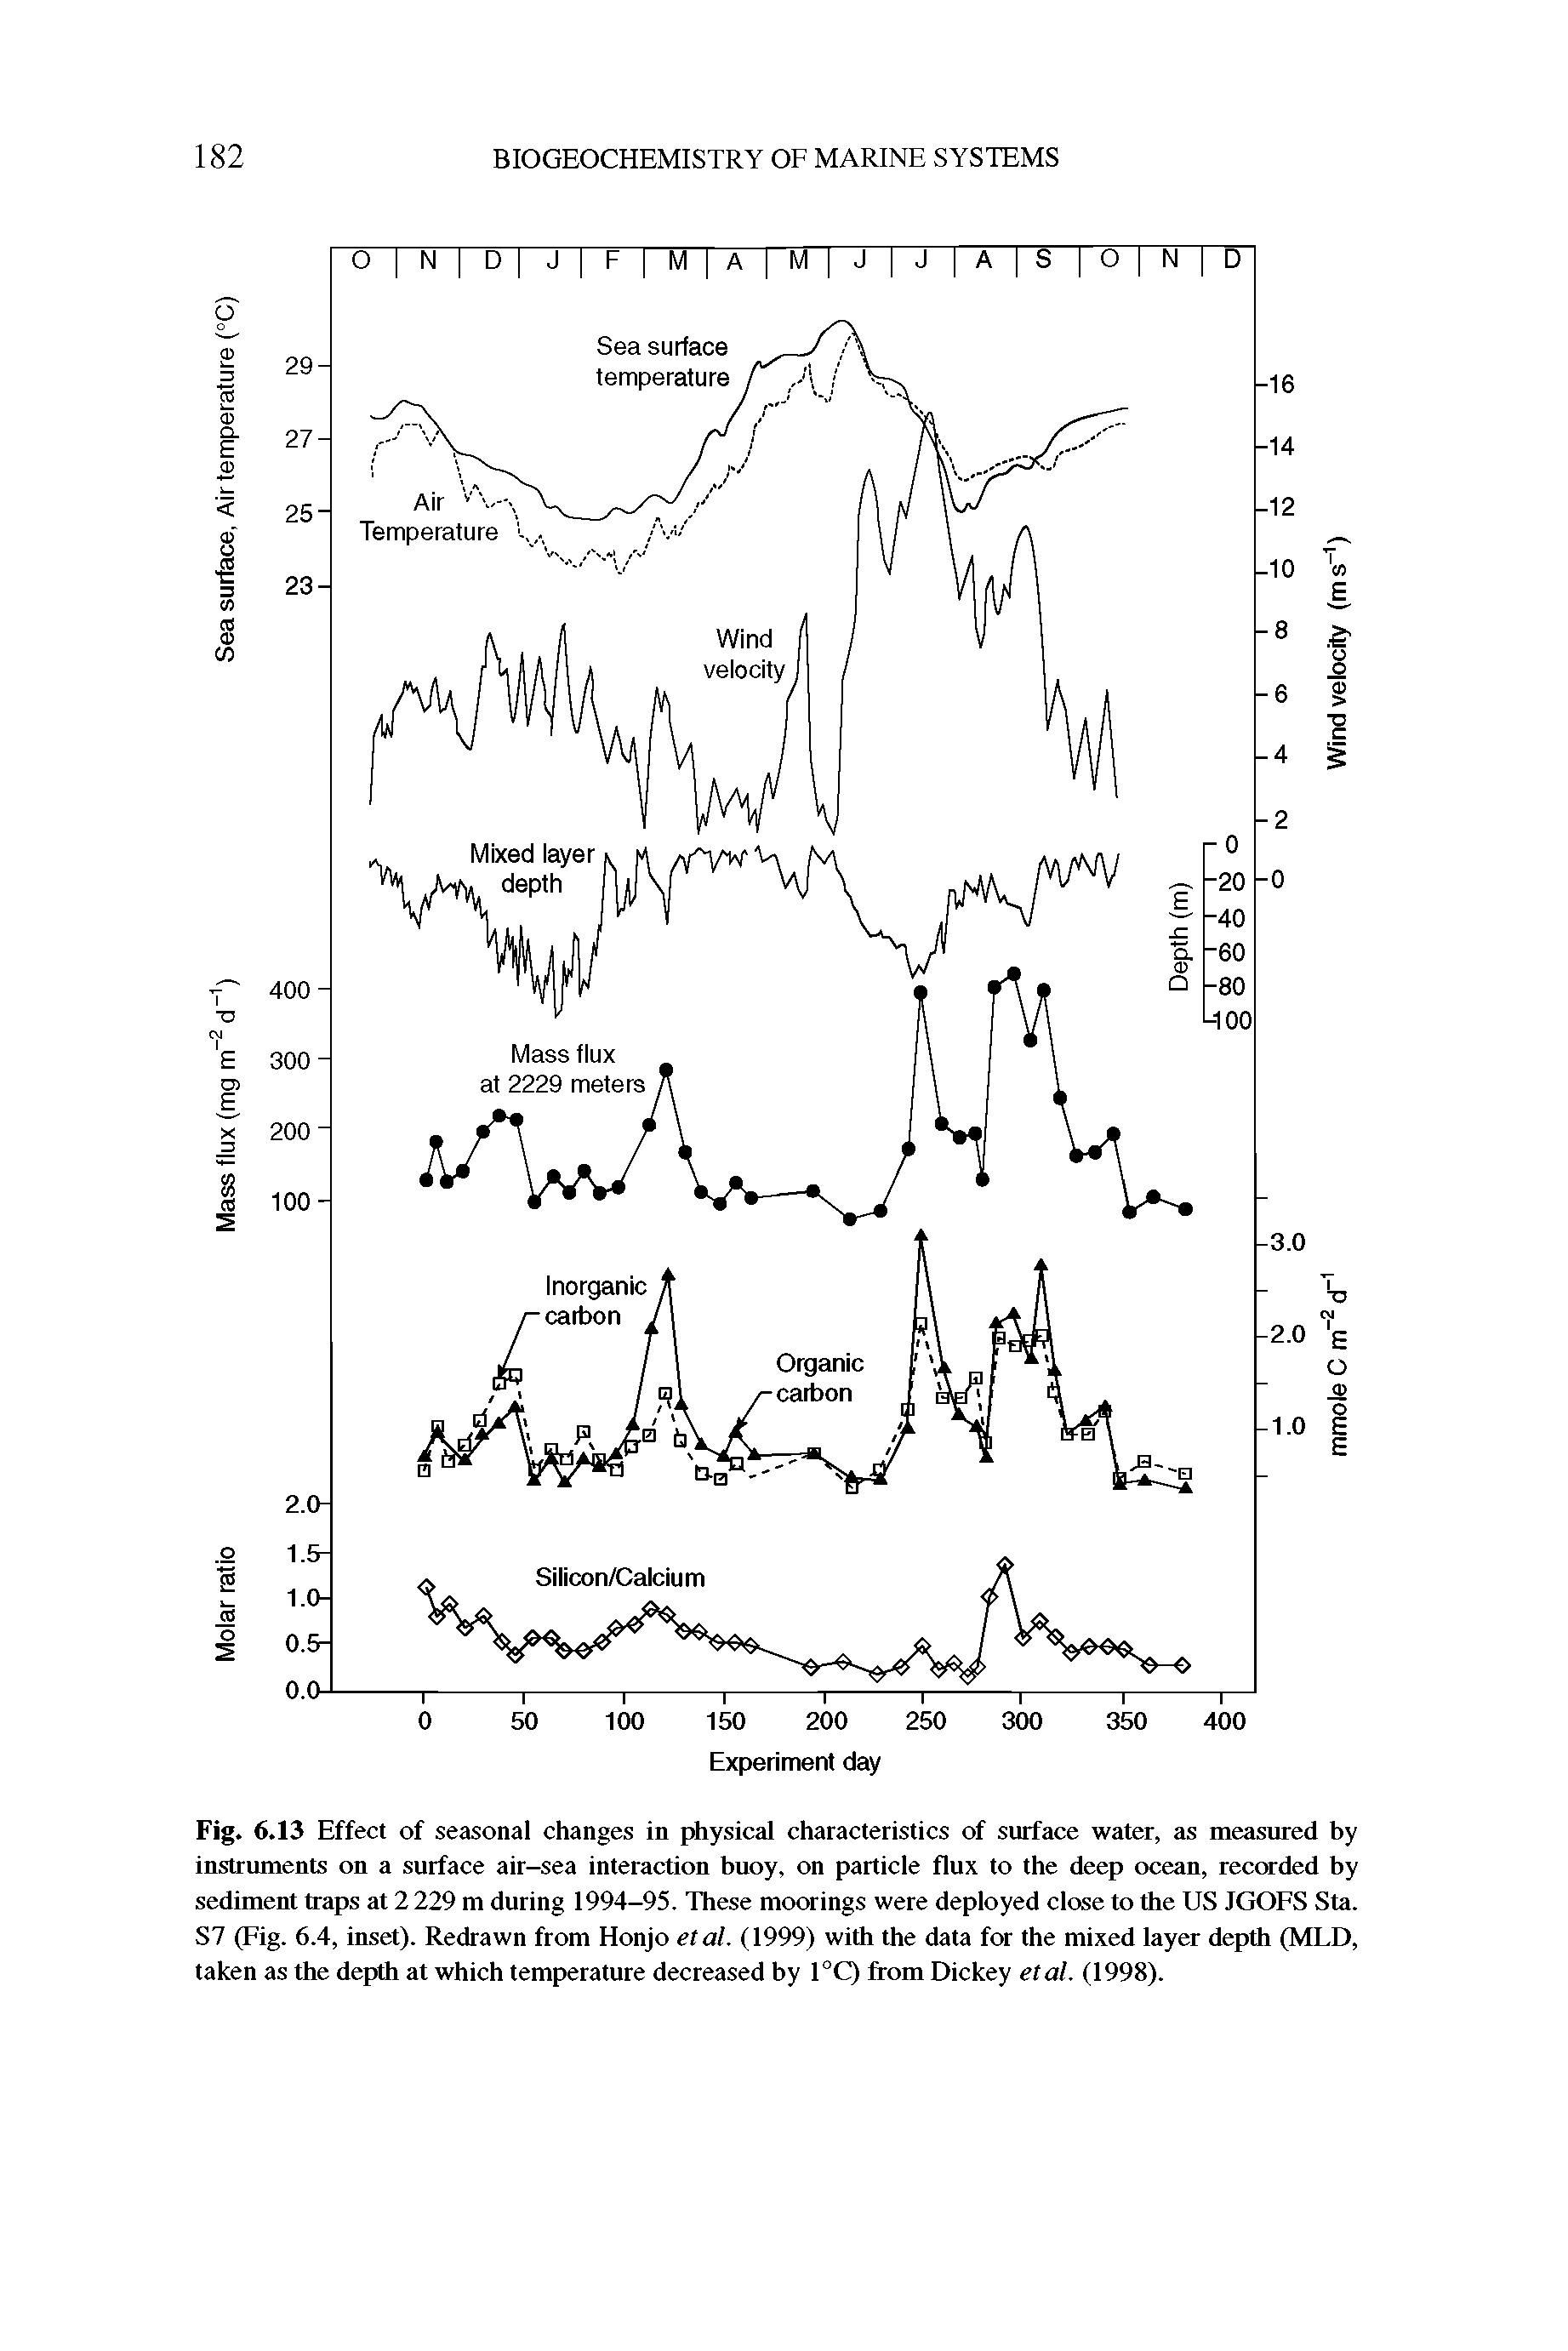 Fig. 6.13 Effect of seasonal changes in physical characteristics of surface water, as measured by instruments on a surface air-sea interaction buoy, on particle flux to the deep ocean, recorded by sediment traps at 2 229 m during 1994-95. These moorings were deployed close to the US JGOFS Sta. S7 (Fig. 6.4, inset). Redrawn from Honjo etal. (1999) with the data for the mixed layer depth (MLD, taken as the depth at which temperature decreased by 1°Q from Dickey etal. (1998).